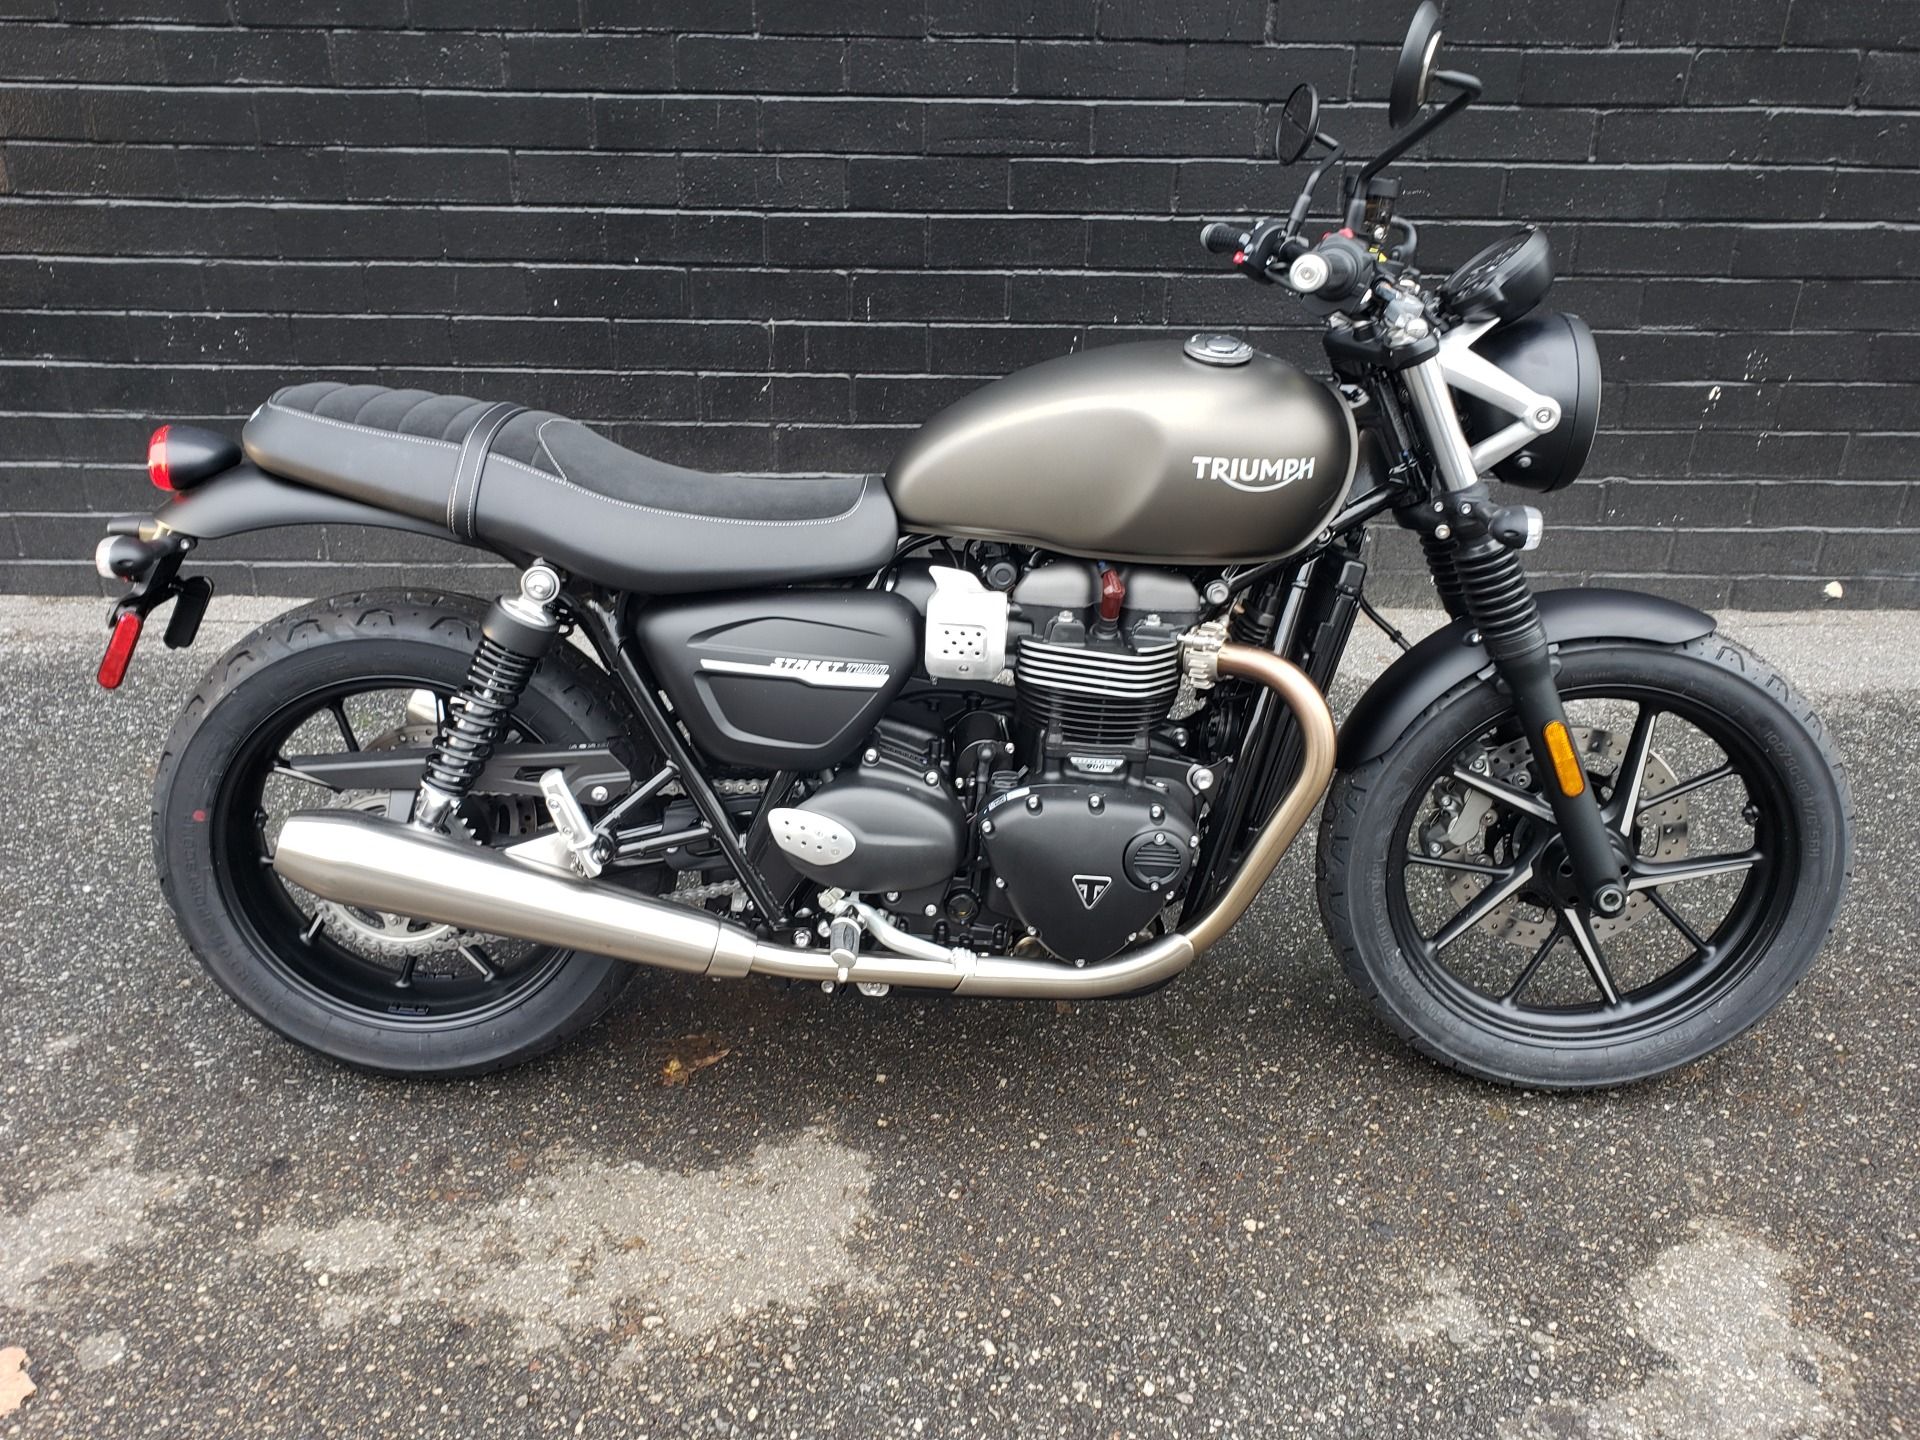 Triumph Street Twin parked next to a wall